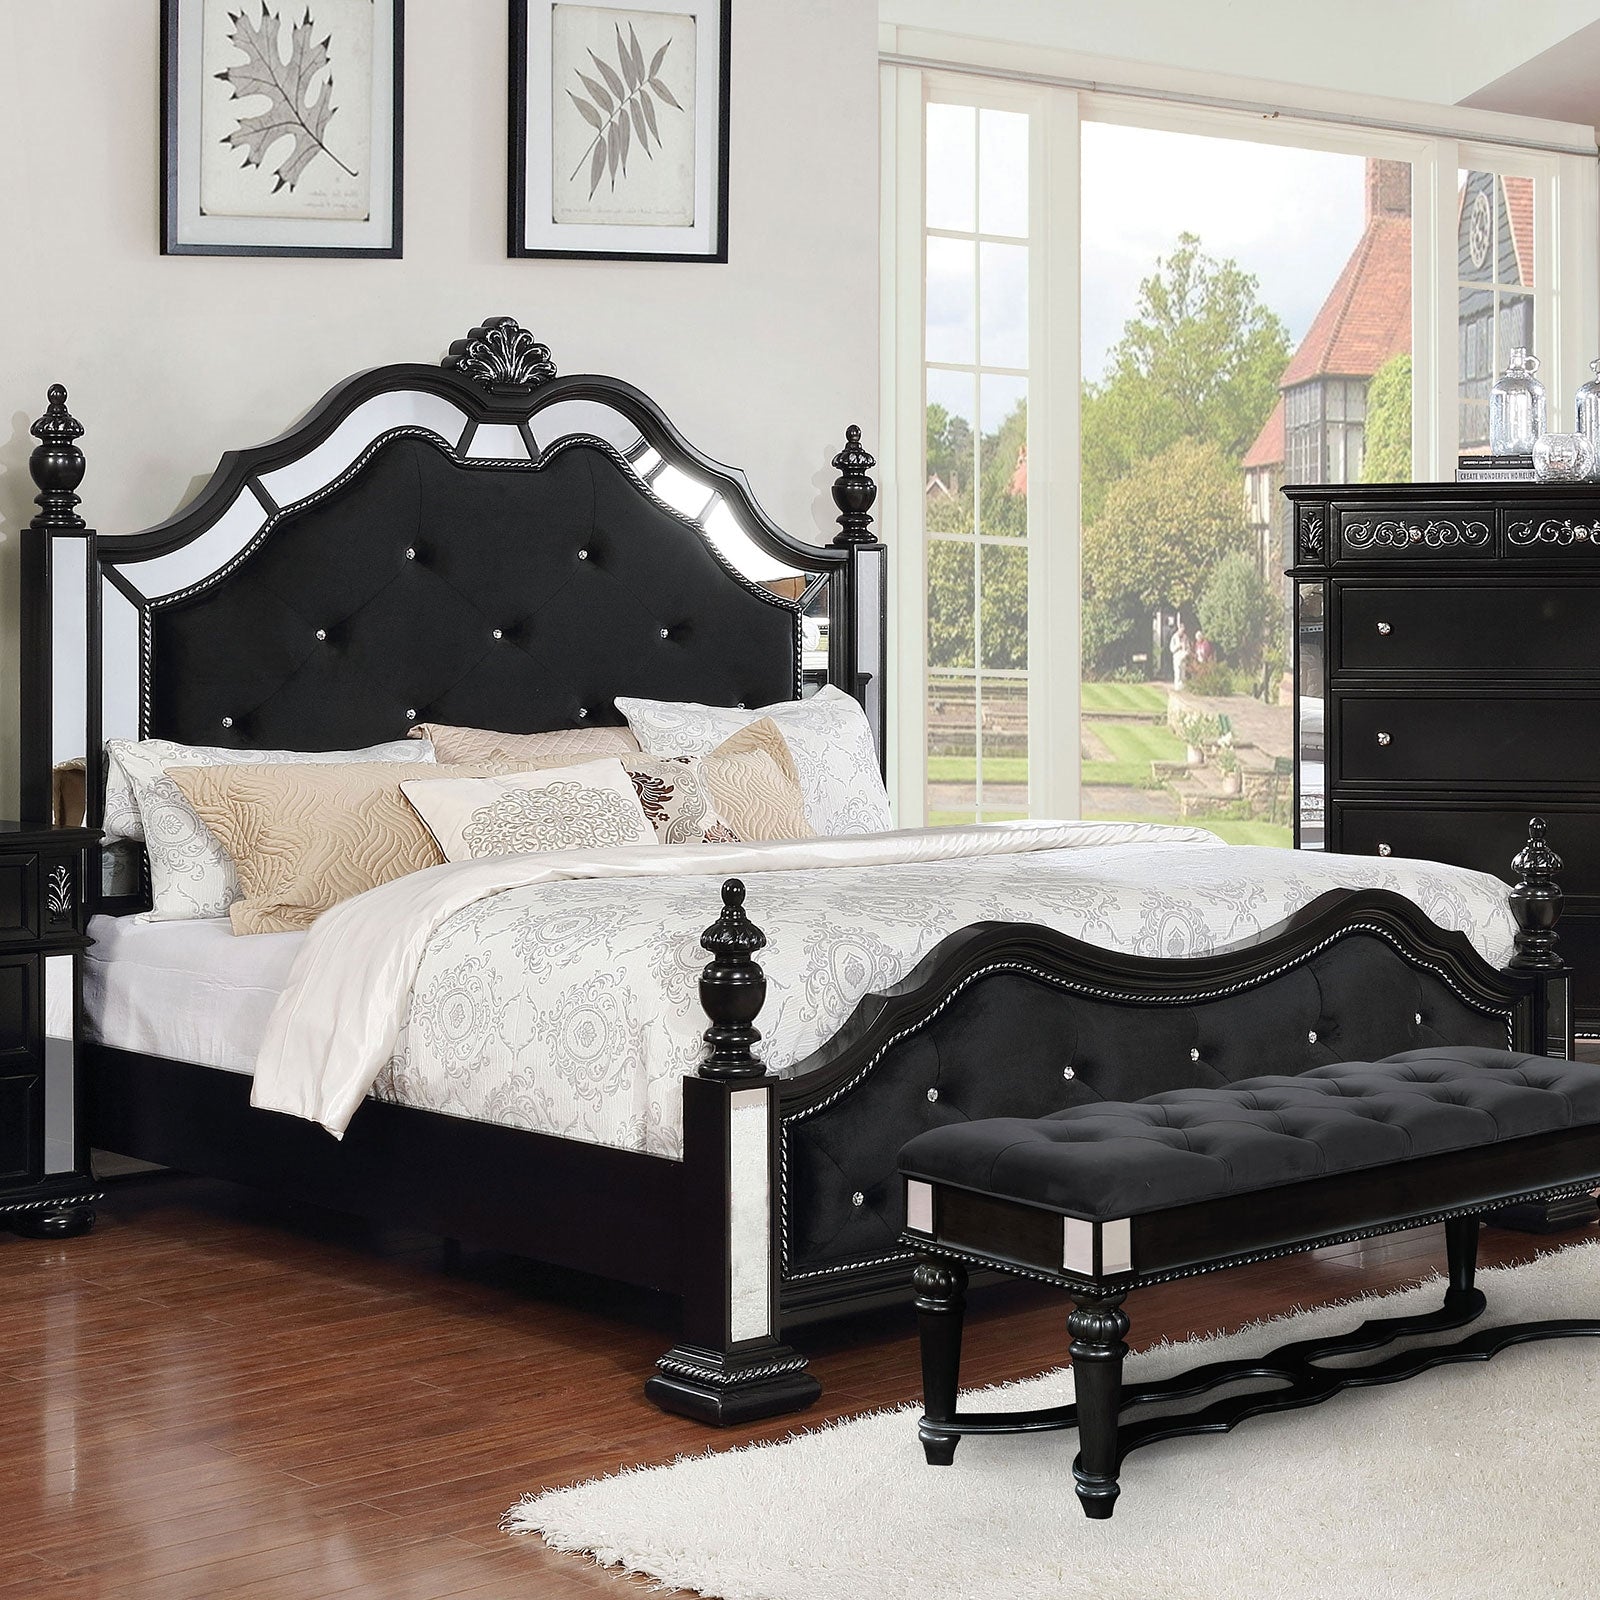 Azha Transtional Glam Style Black King Bed w- Mirror Accents